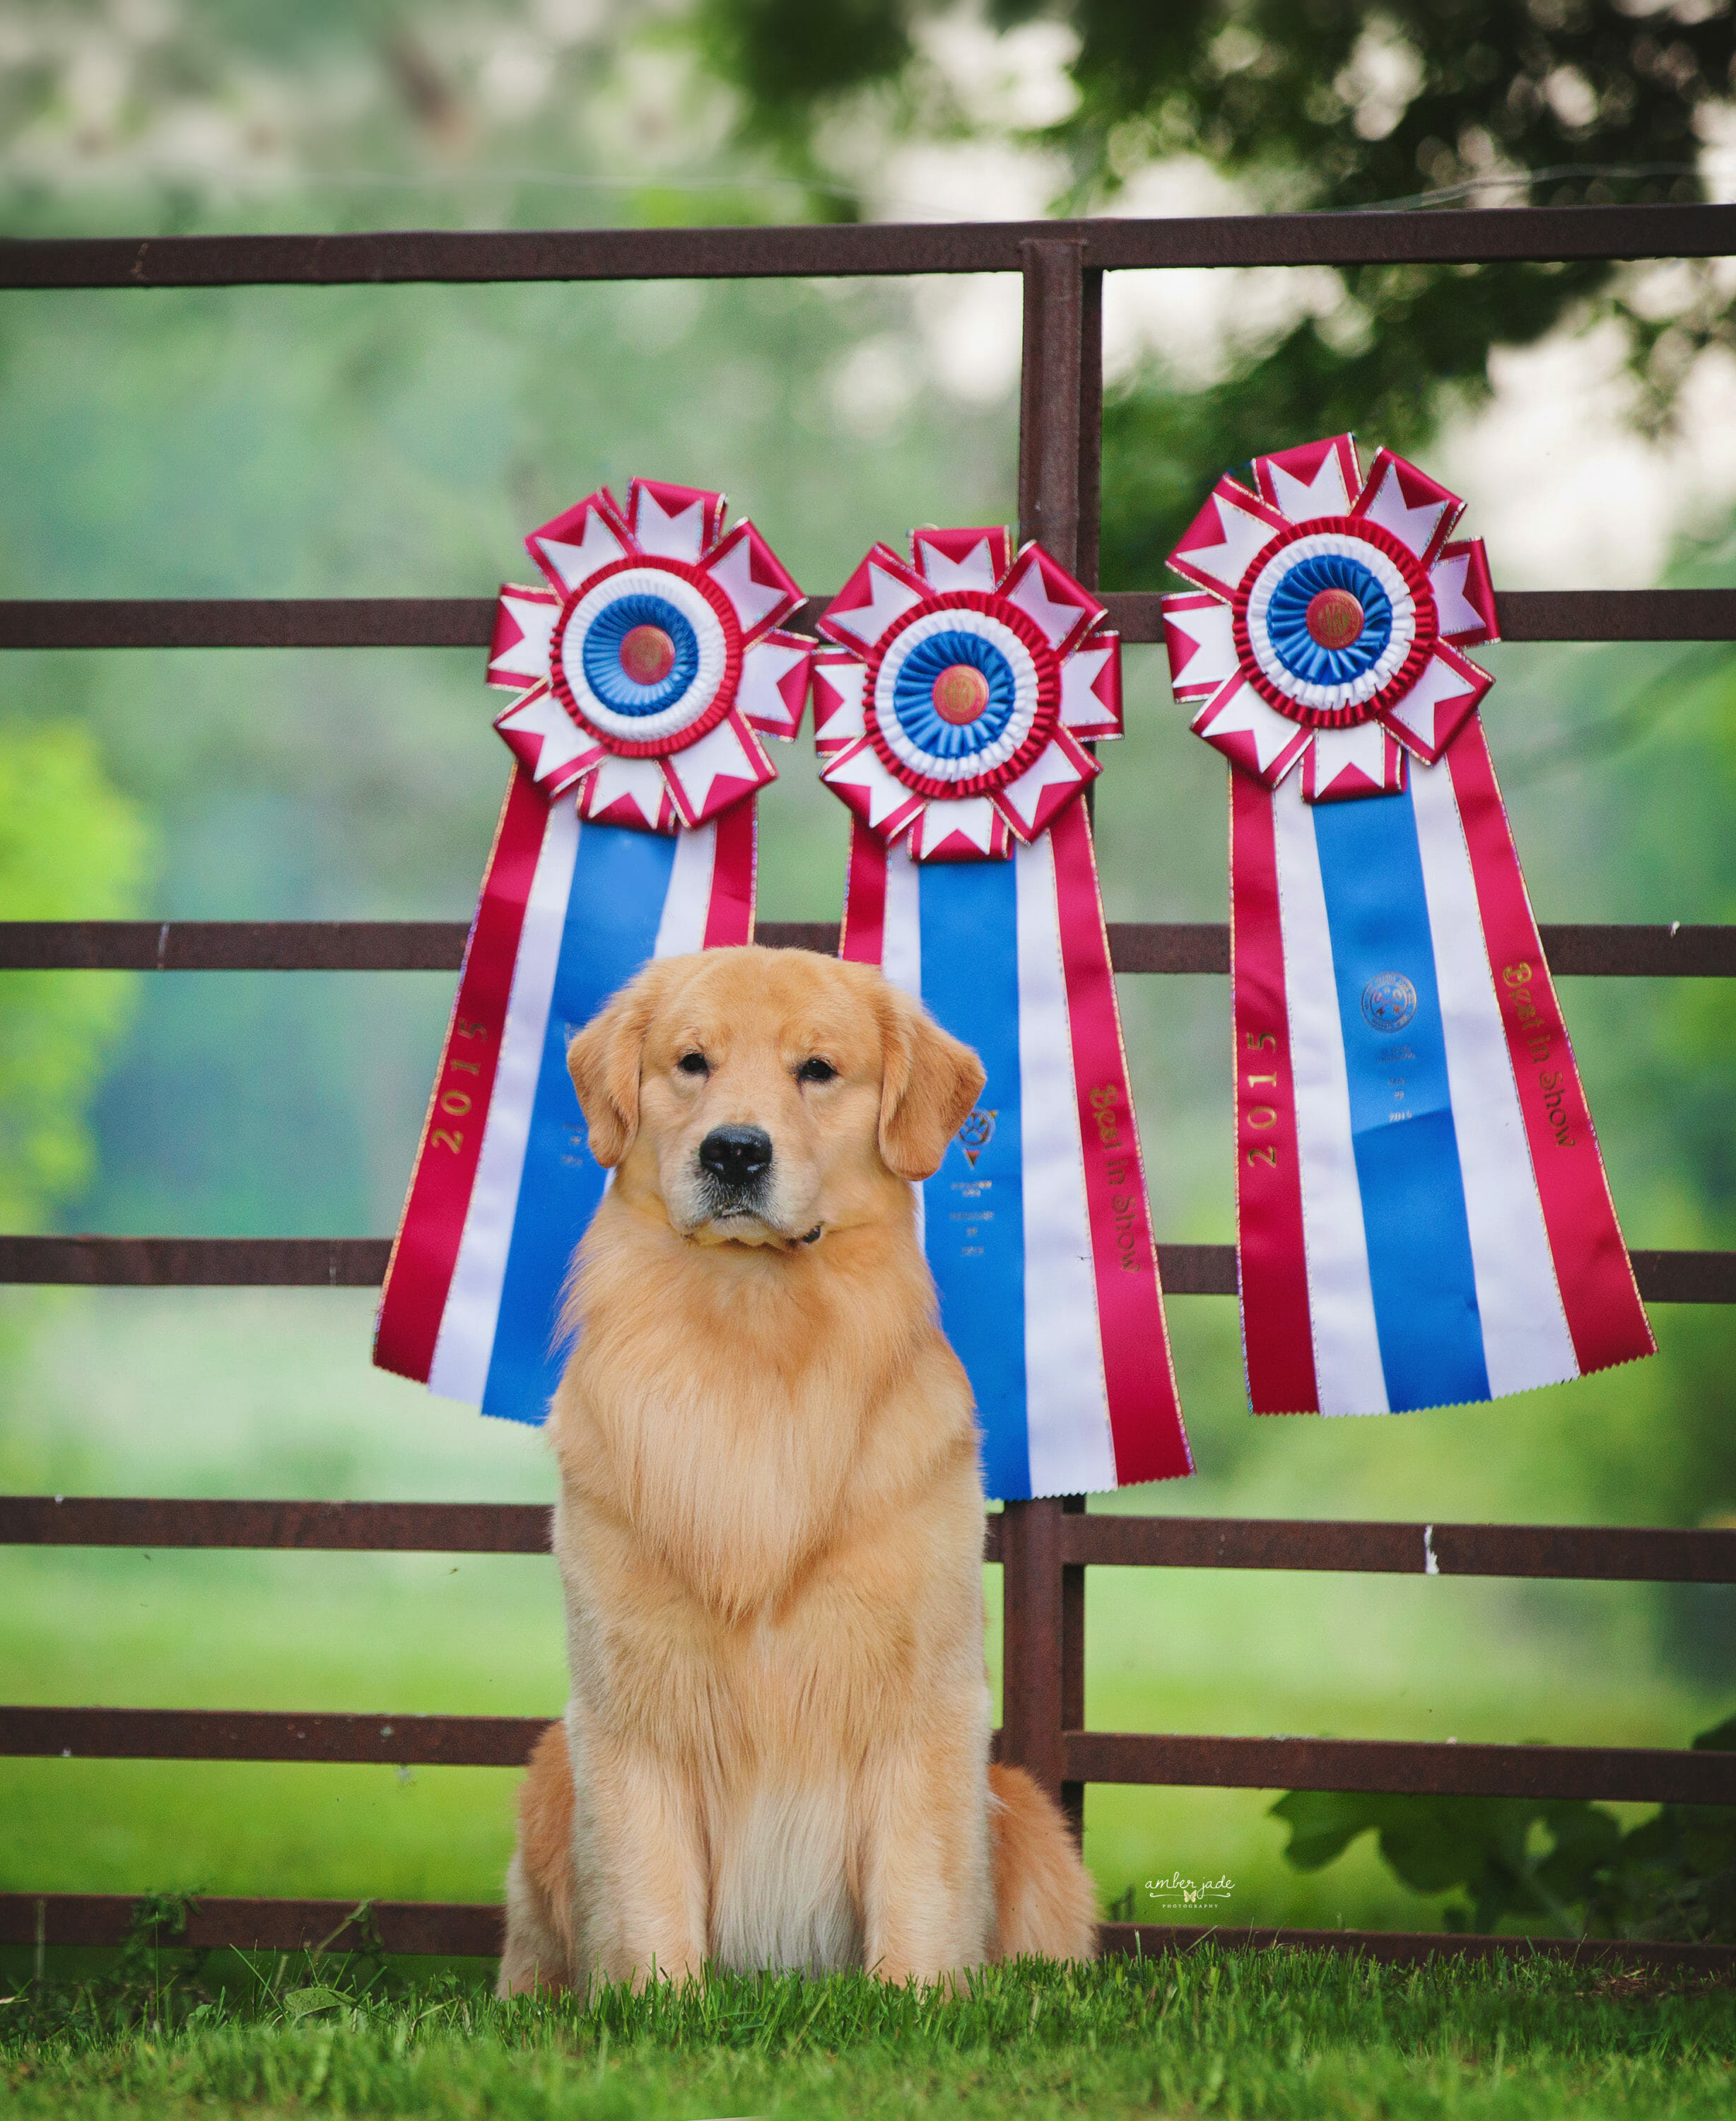 Golden Retriever with best in show ribbons